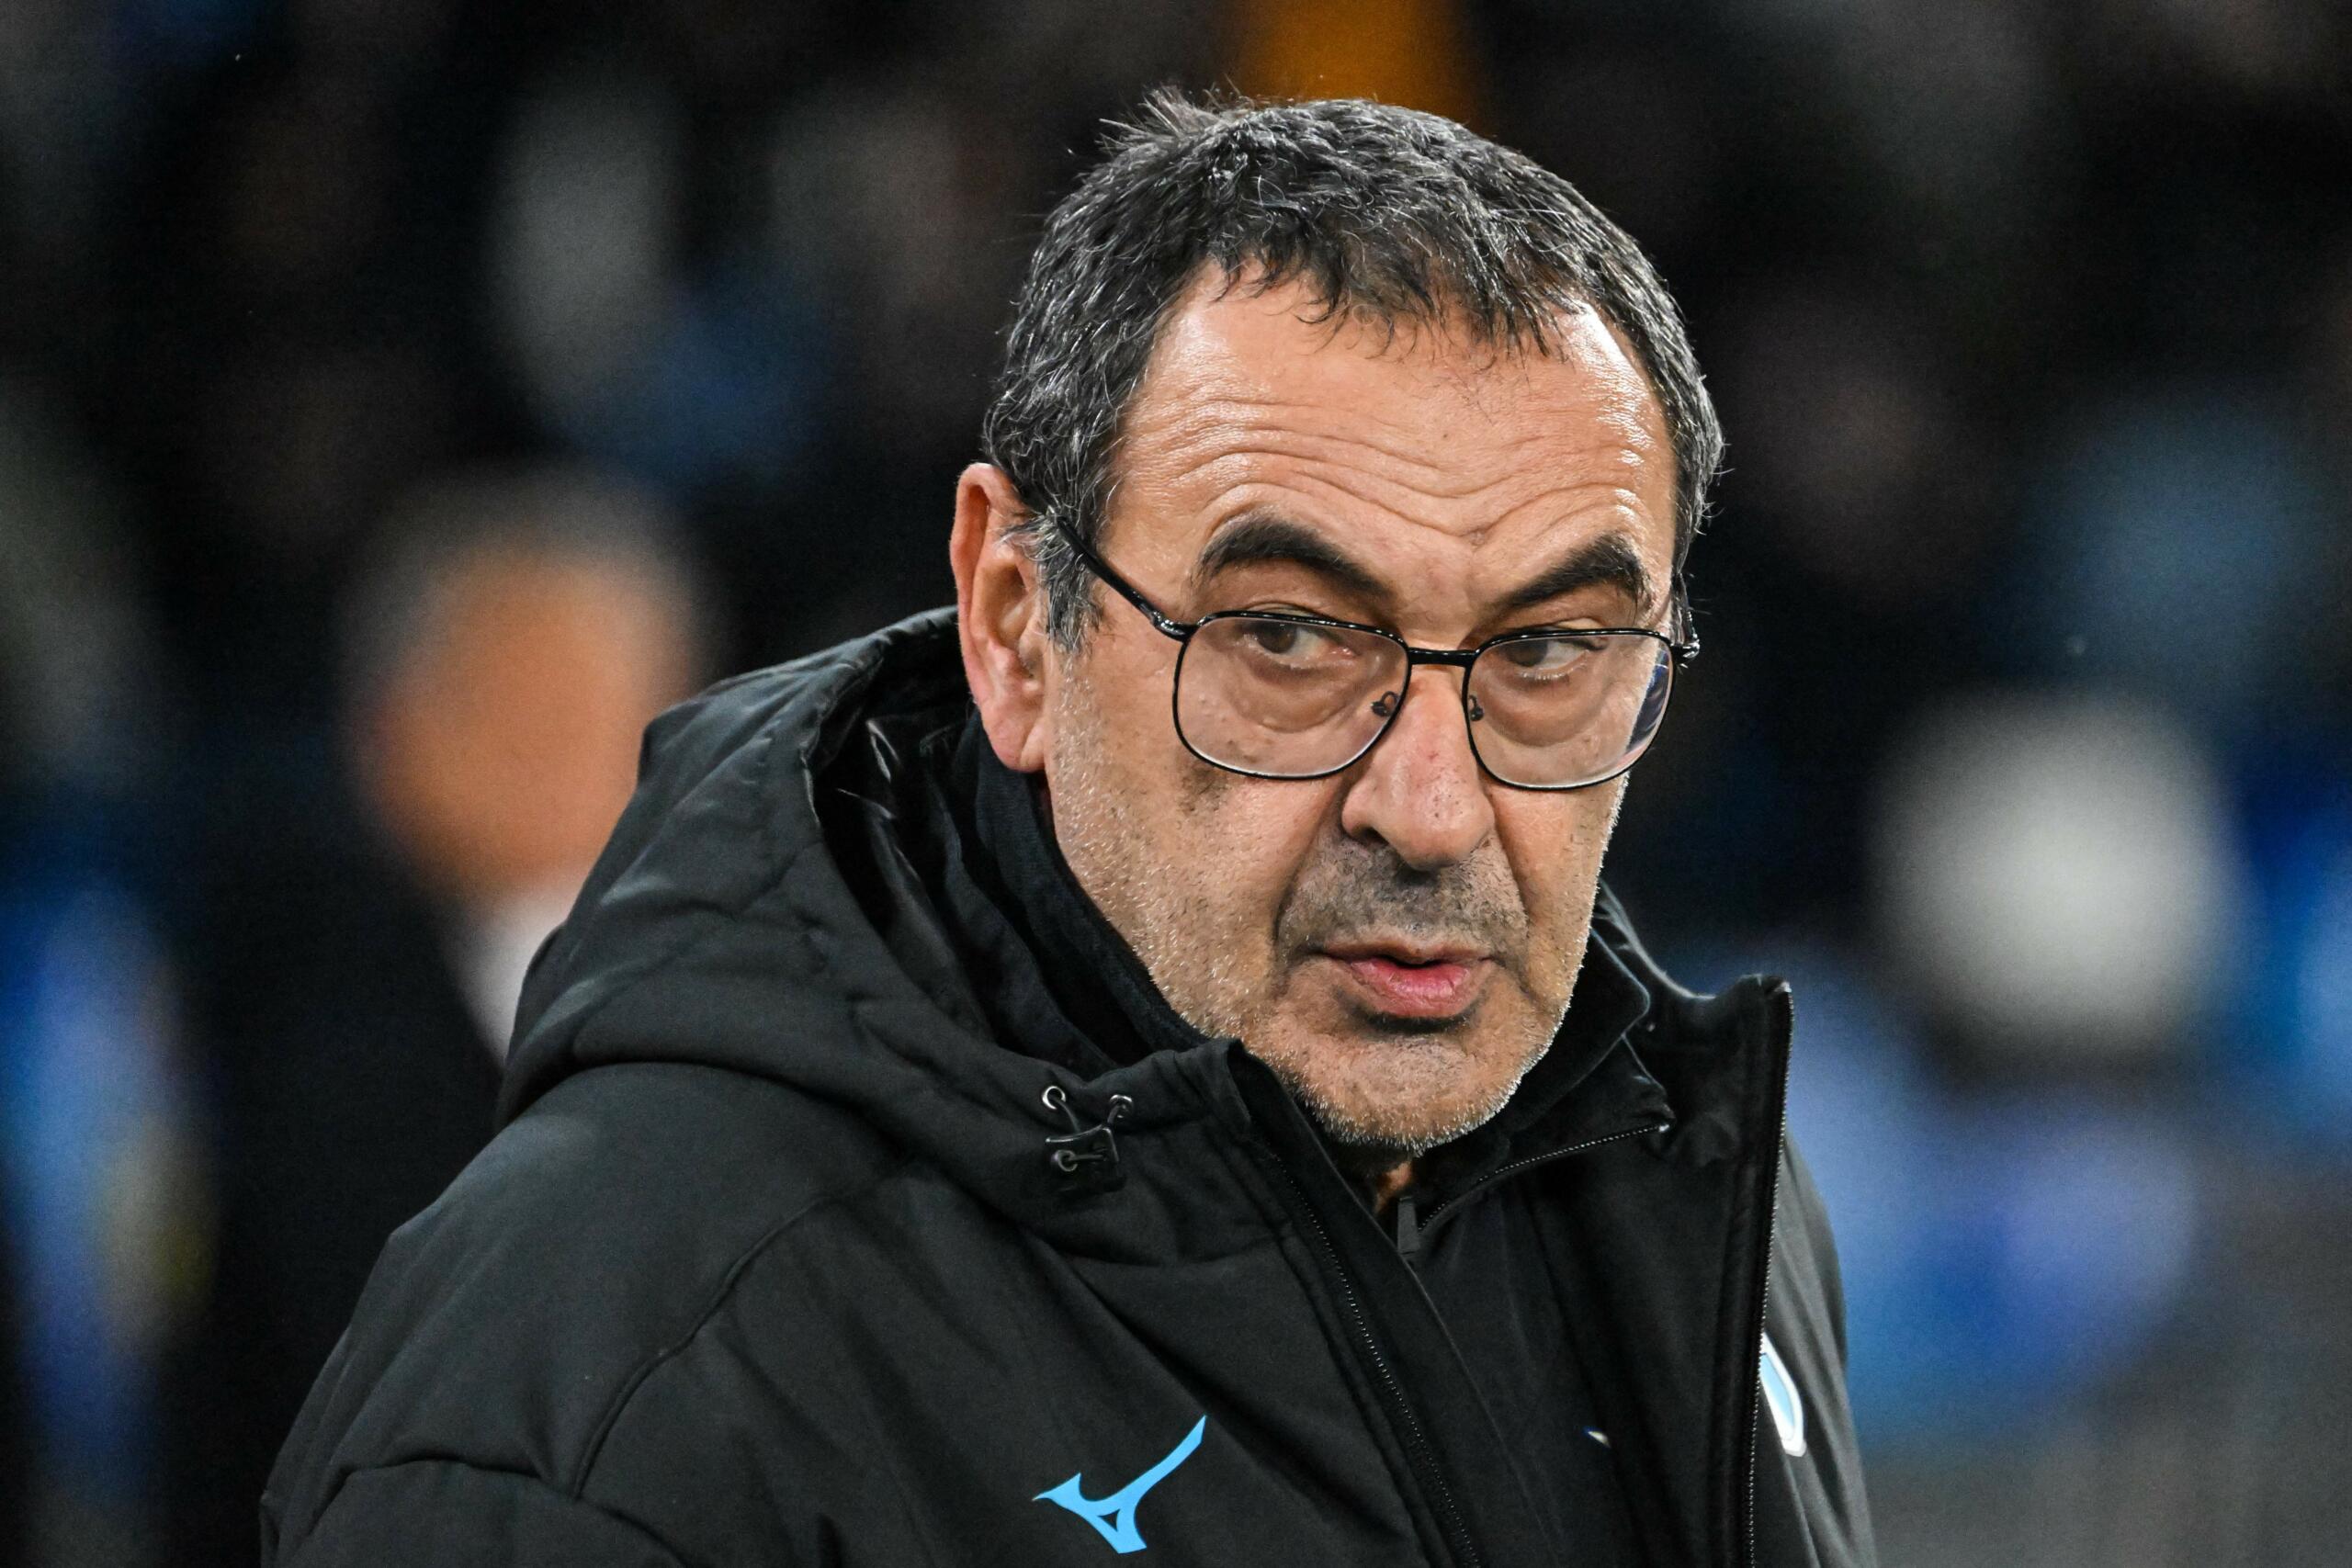 Maurizio Sarri gave a brief speech to the players before handing over his resignation and leaving the Formello training center for good.